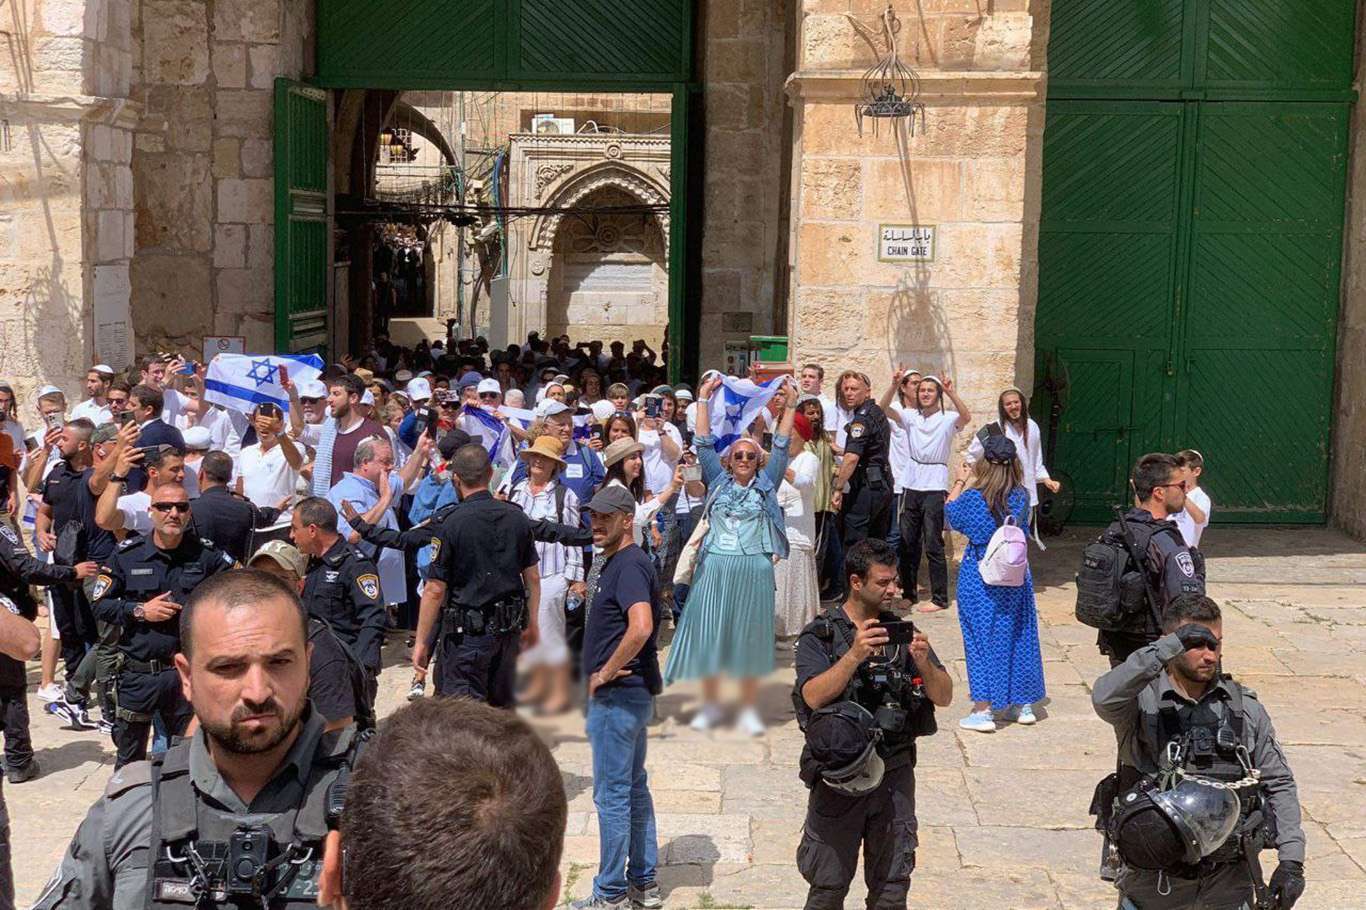 Nearly 2,000 settlers defile Aqsa Mosque ahead of flag march in Jerusalem